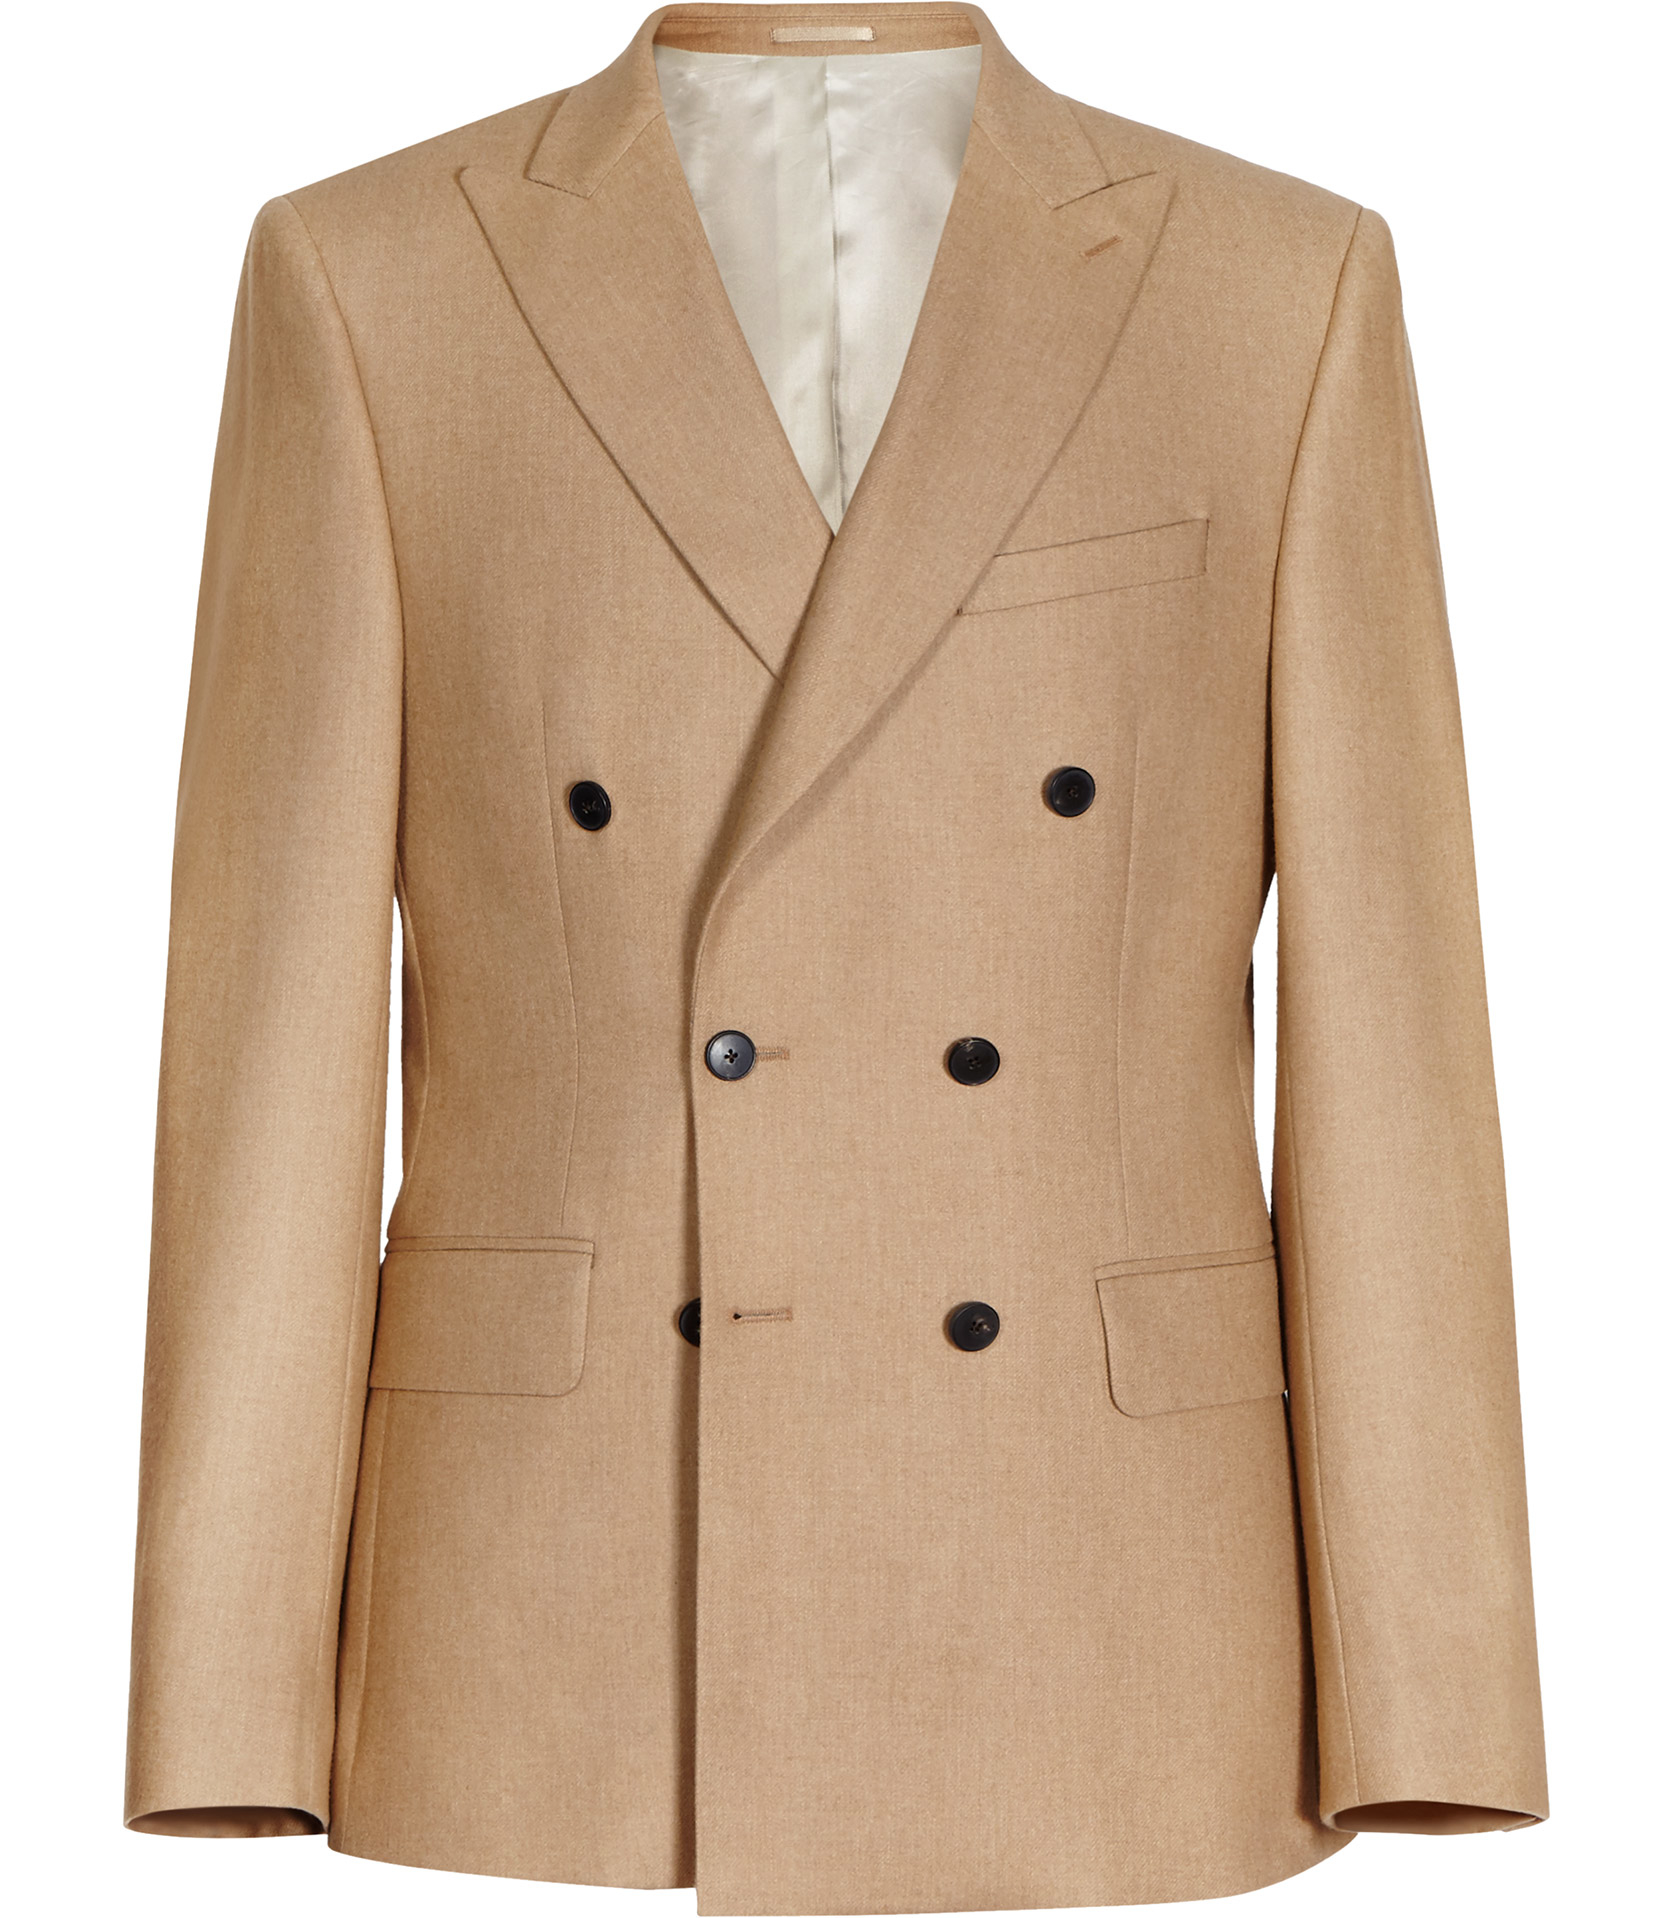 Lyst - Reiss Disc B Double Breasted Blazer in Natural for Men